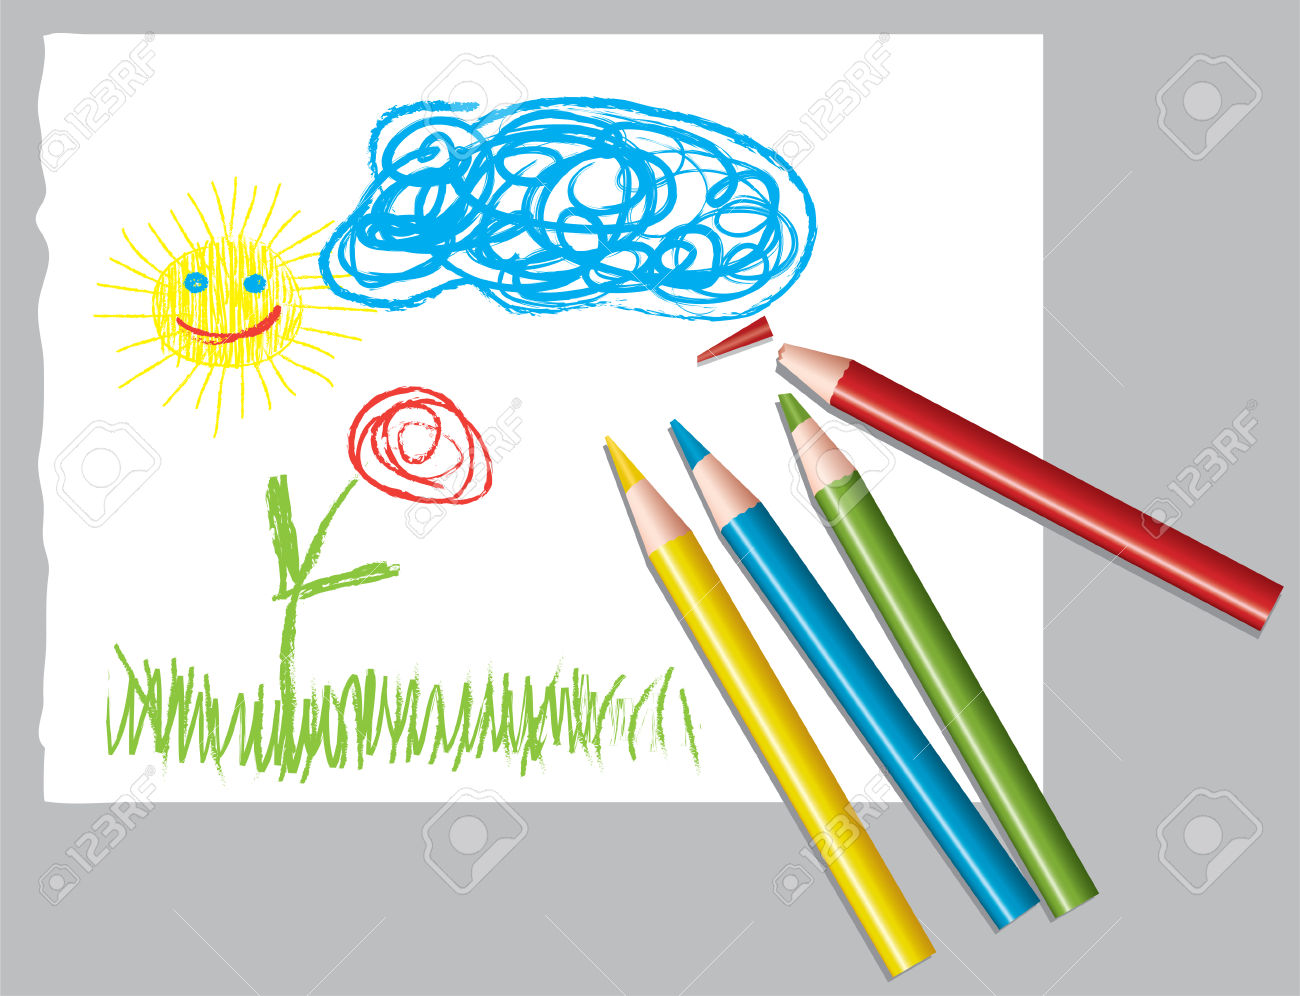 clipart of paper and pencil - photo #36